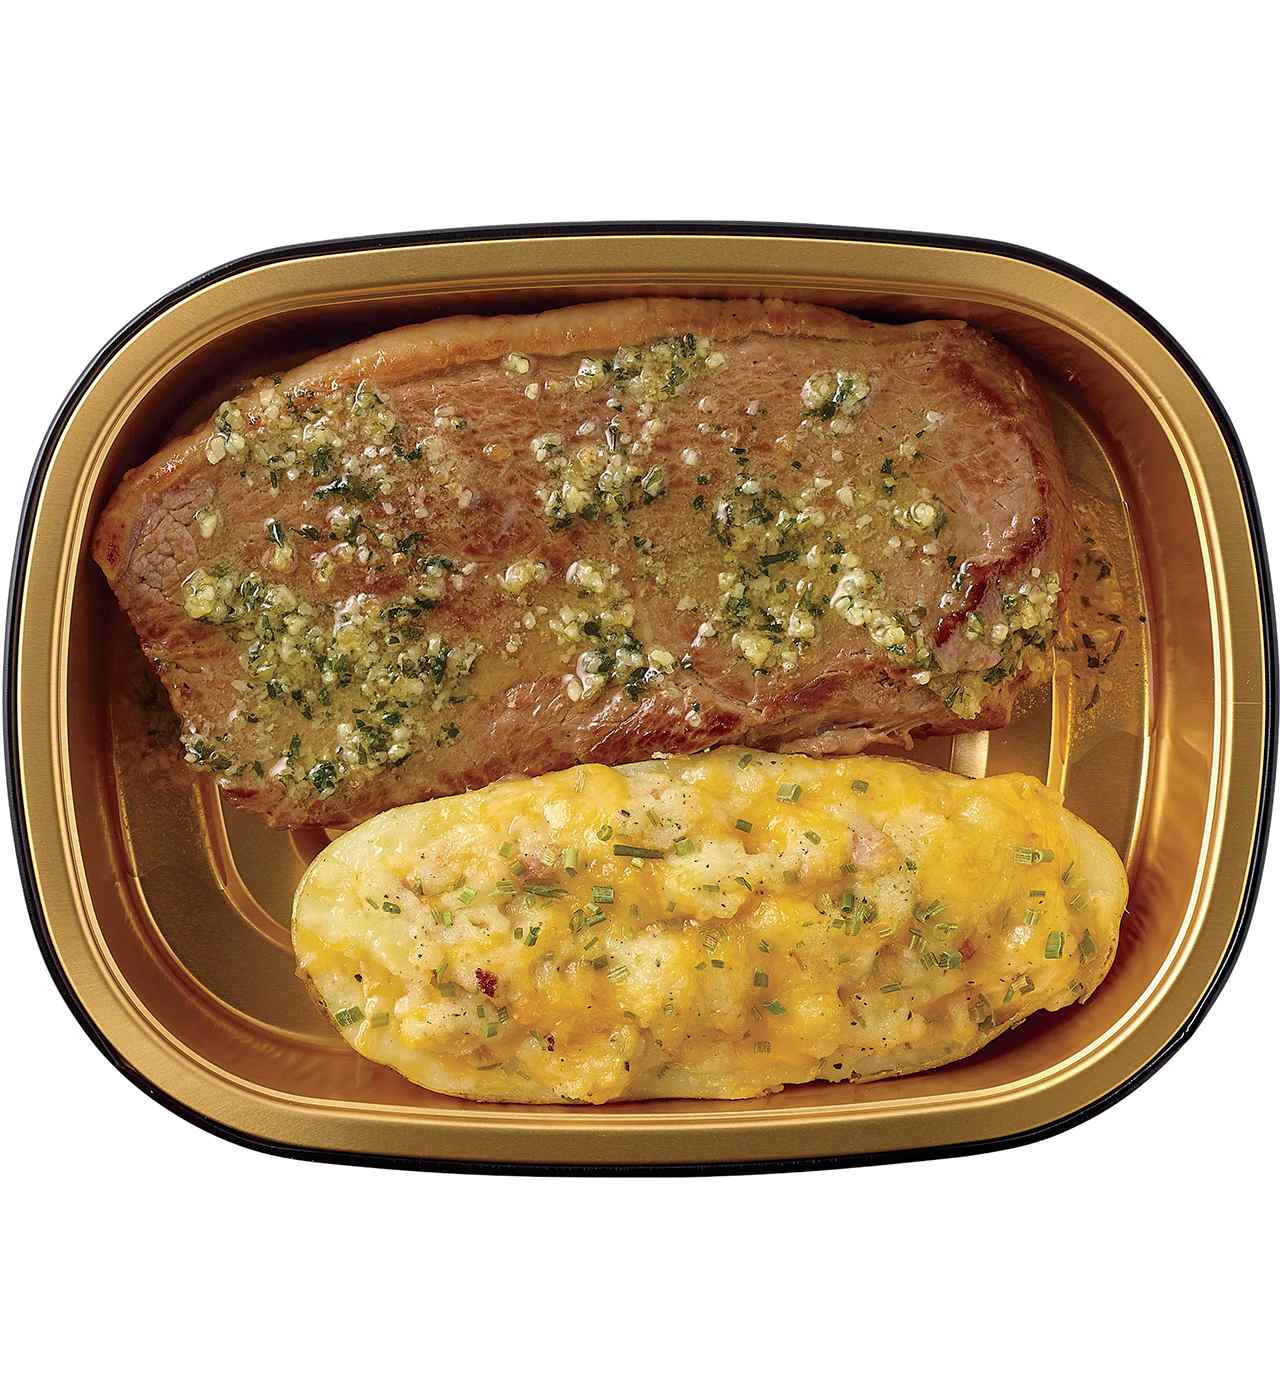 Meal Simple by H-E-B Beef Petite Sirloin Steak & Loaded Potato Boat; image 1 of 2